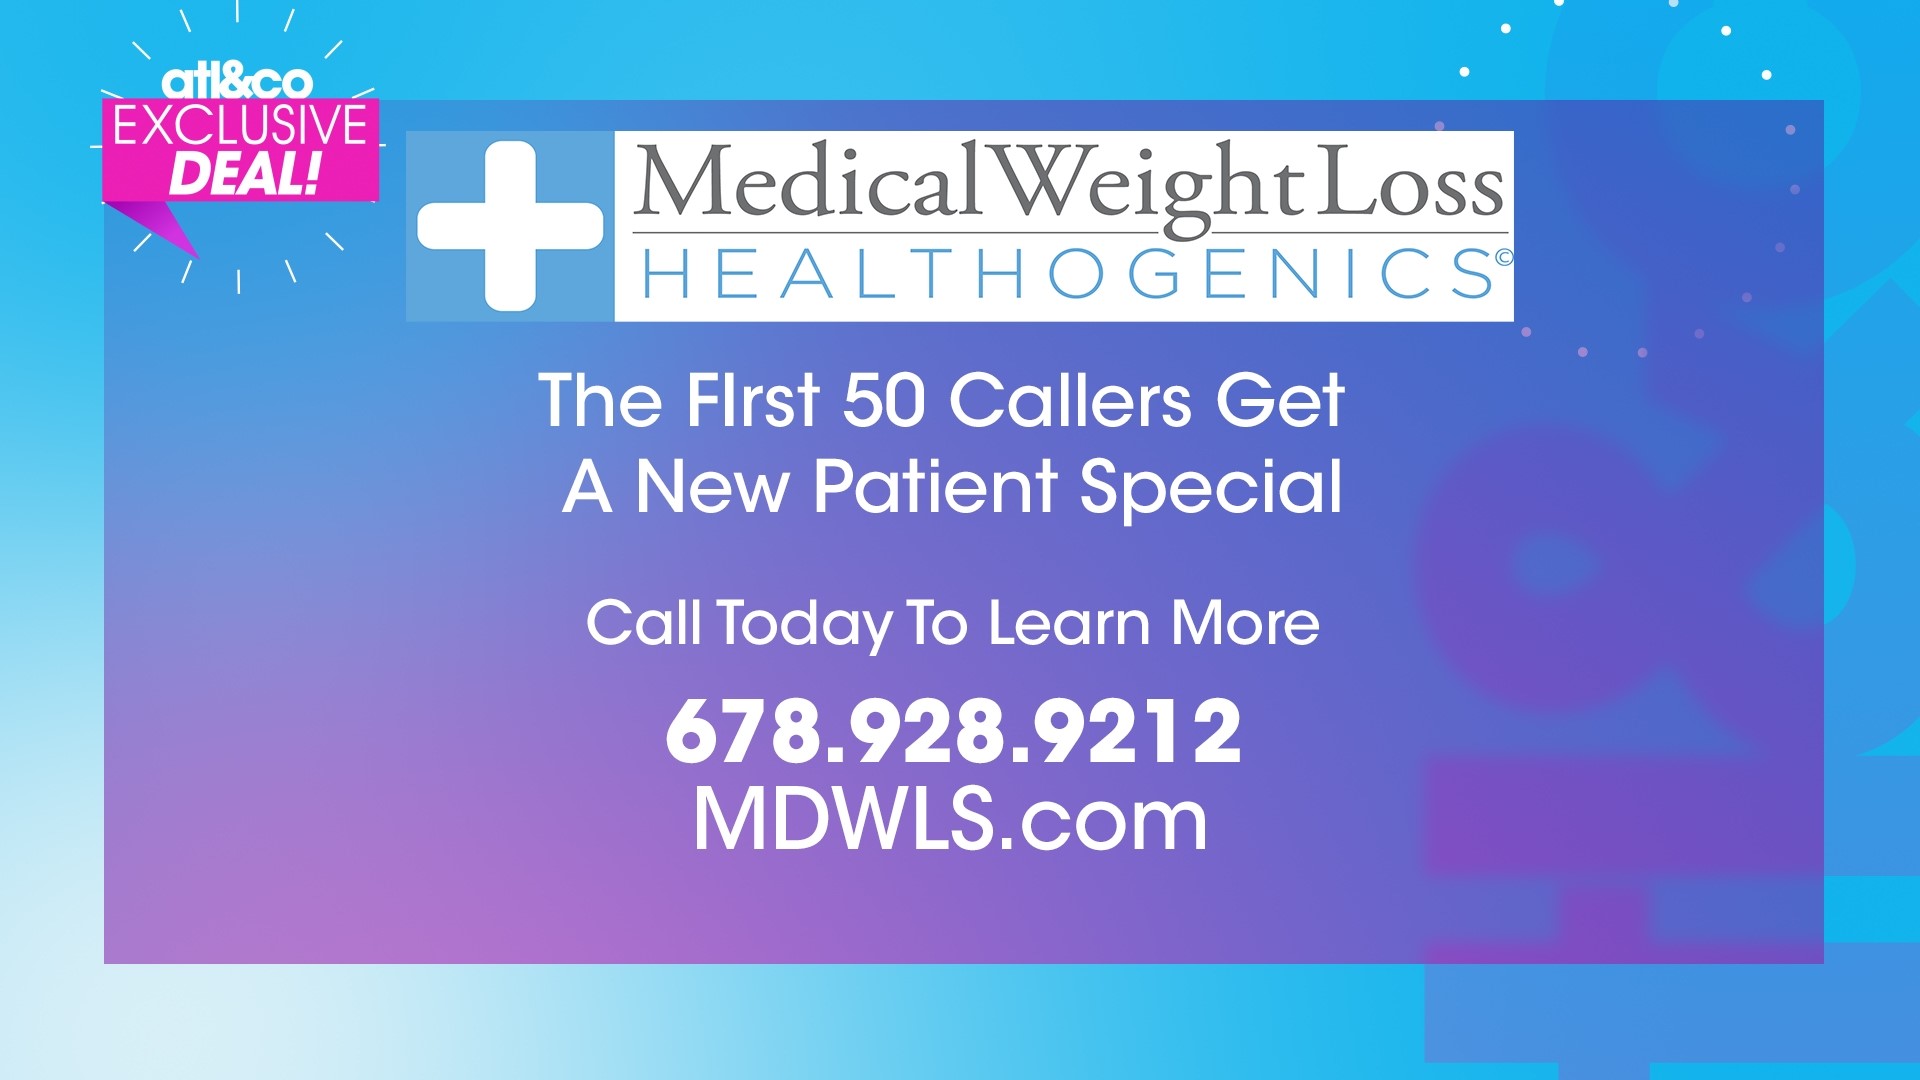 Right now the first 50 callers get a new patient special! Call today 678.928.9212 or head to MDWLS.com